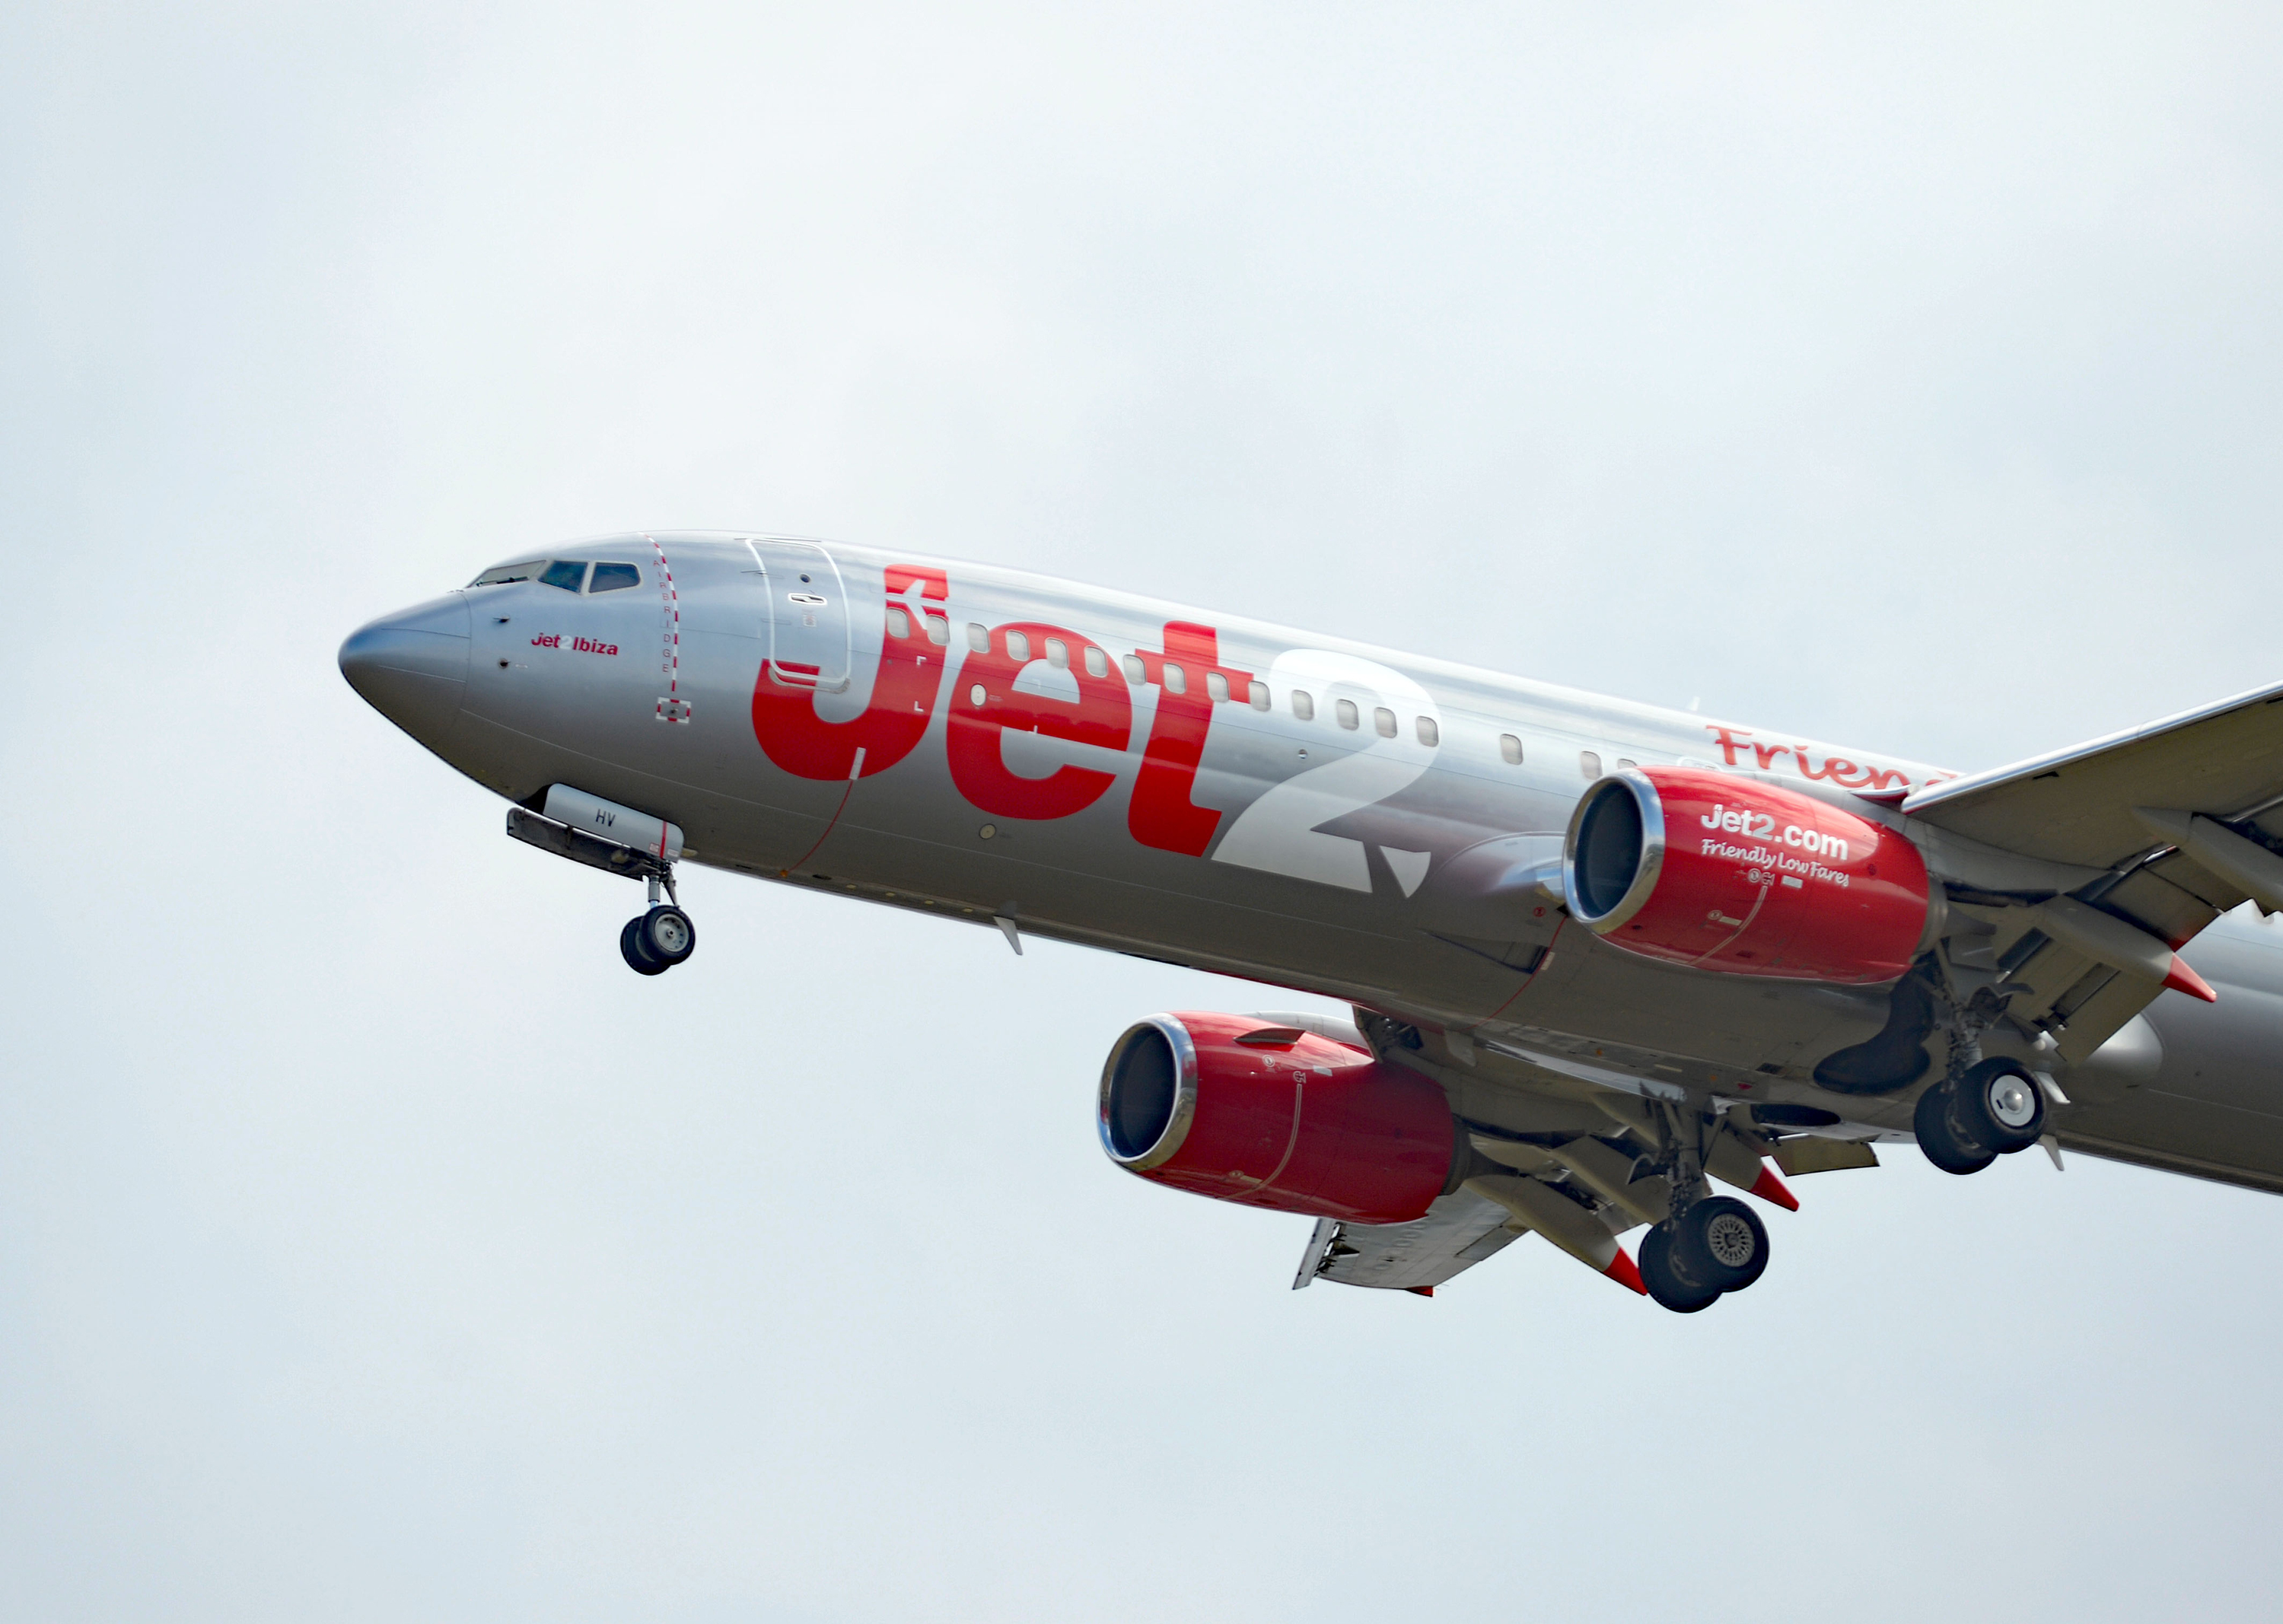 jet2 points to softening in holiday prices ahead of summer season